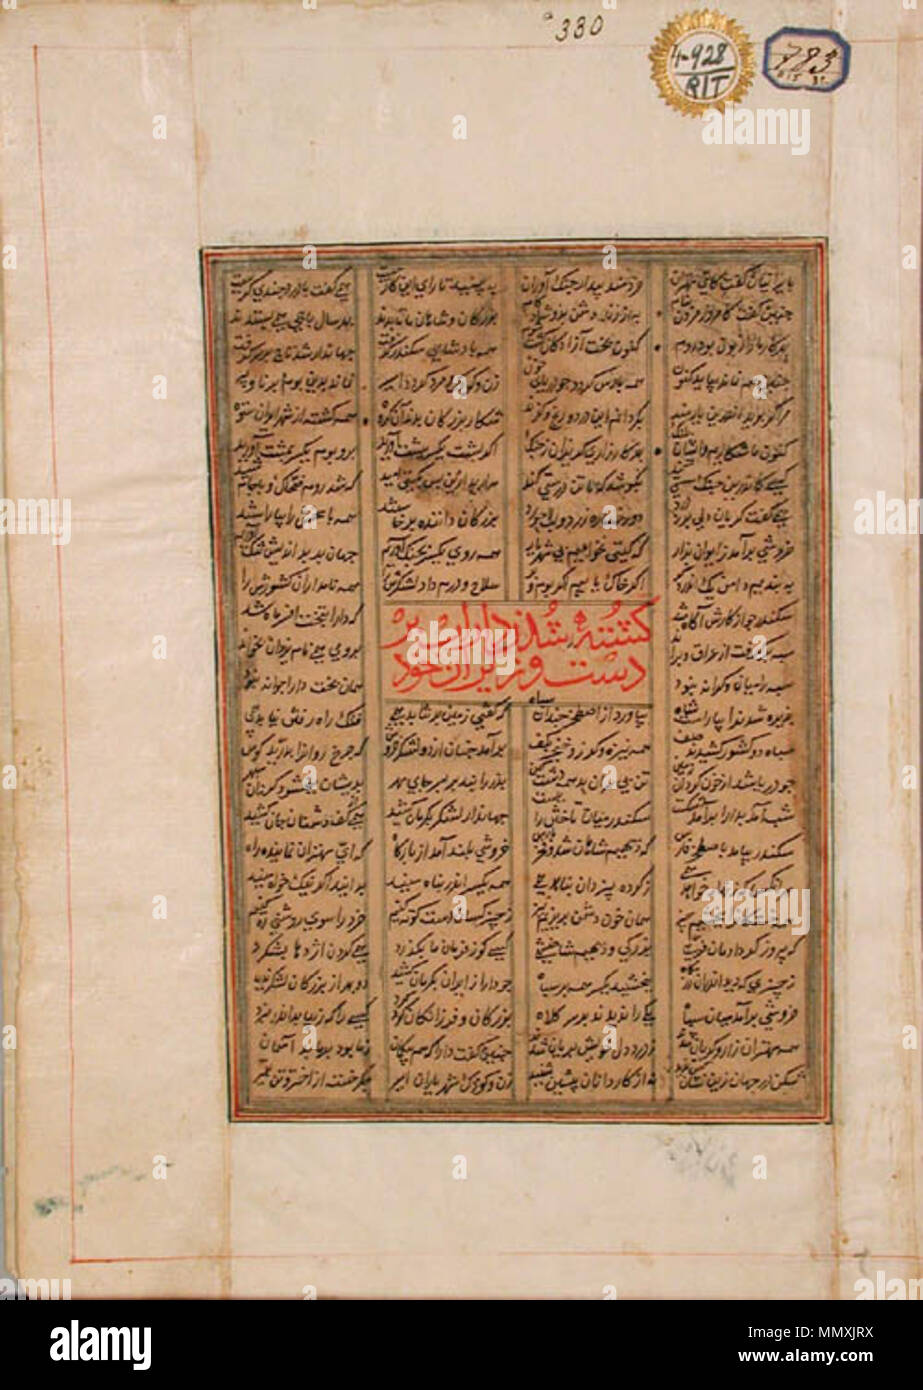 . English: Series Title: Shahnama Creation Date: ca. 1450 Display Dimensions: 11 7/16 in. x 8 1/8 in. x 1/4 in. (29.05 cm x 20.6 cm x 0.64 cm) Credit Line: Edwin Binney 3rd Collection Accession Number: 1990.246 Collection: <a href='http://www.sdmart.org/art/our-collection/asian-art' rel='nofollow'>The San Diego Museum of Art</a>  . 6 September 2011, 14:31:18. English: thesandiegomuseumofartcollection Fragment of a manuscript. 26 leaves with 19 paintings (6124525613) Stock Photo